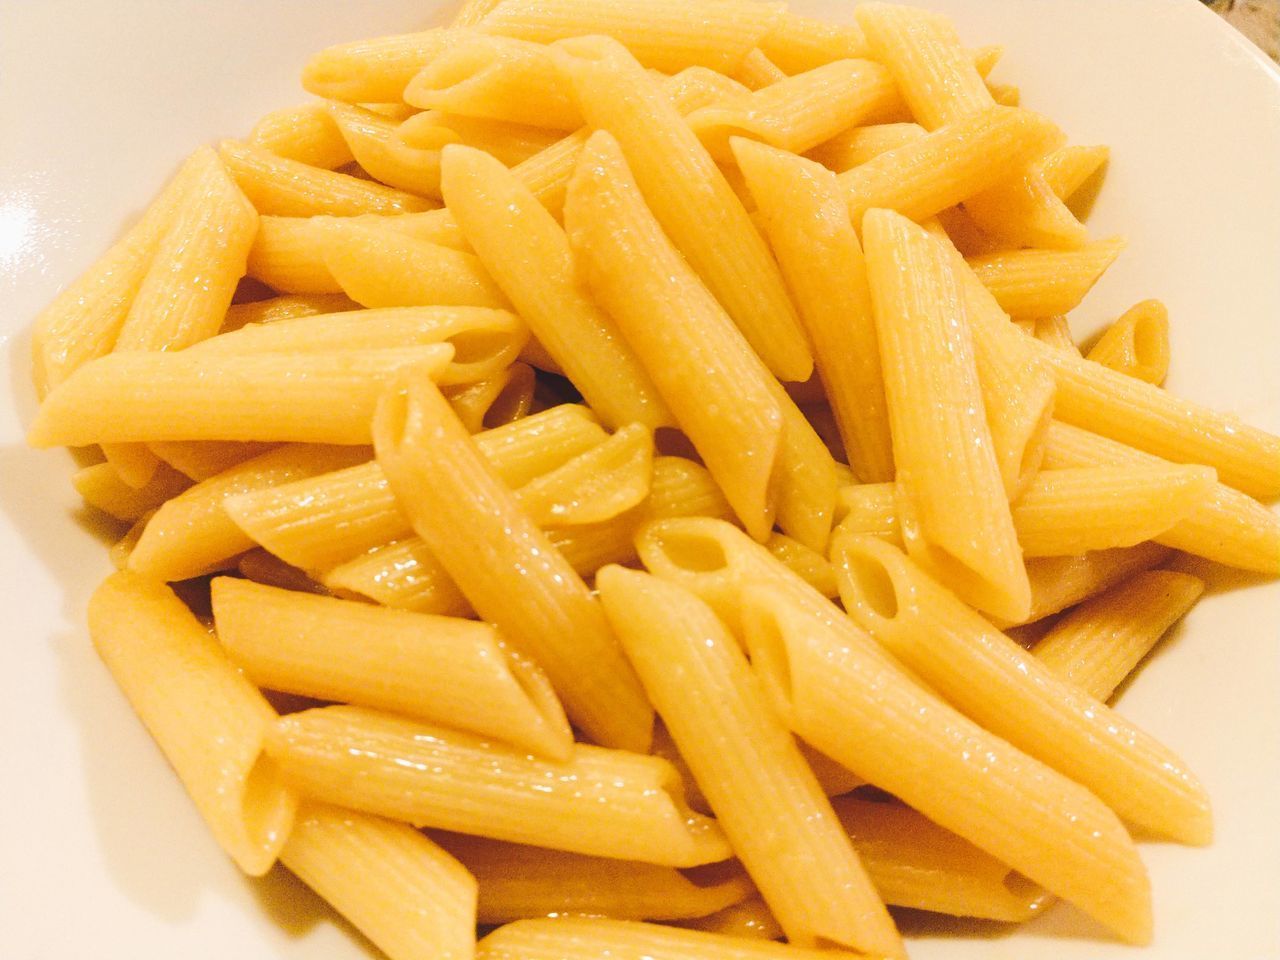 CLOSE-UP OF PASTA WITH FRIES AND YELLOW AND WHITE